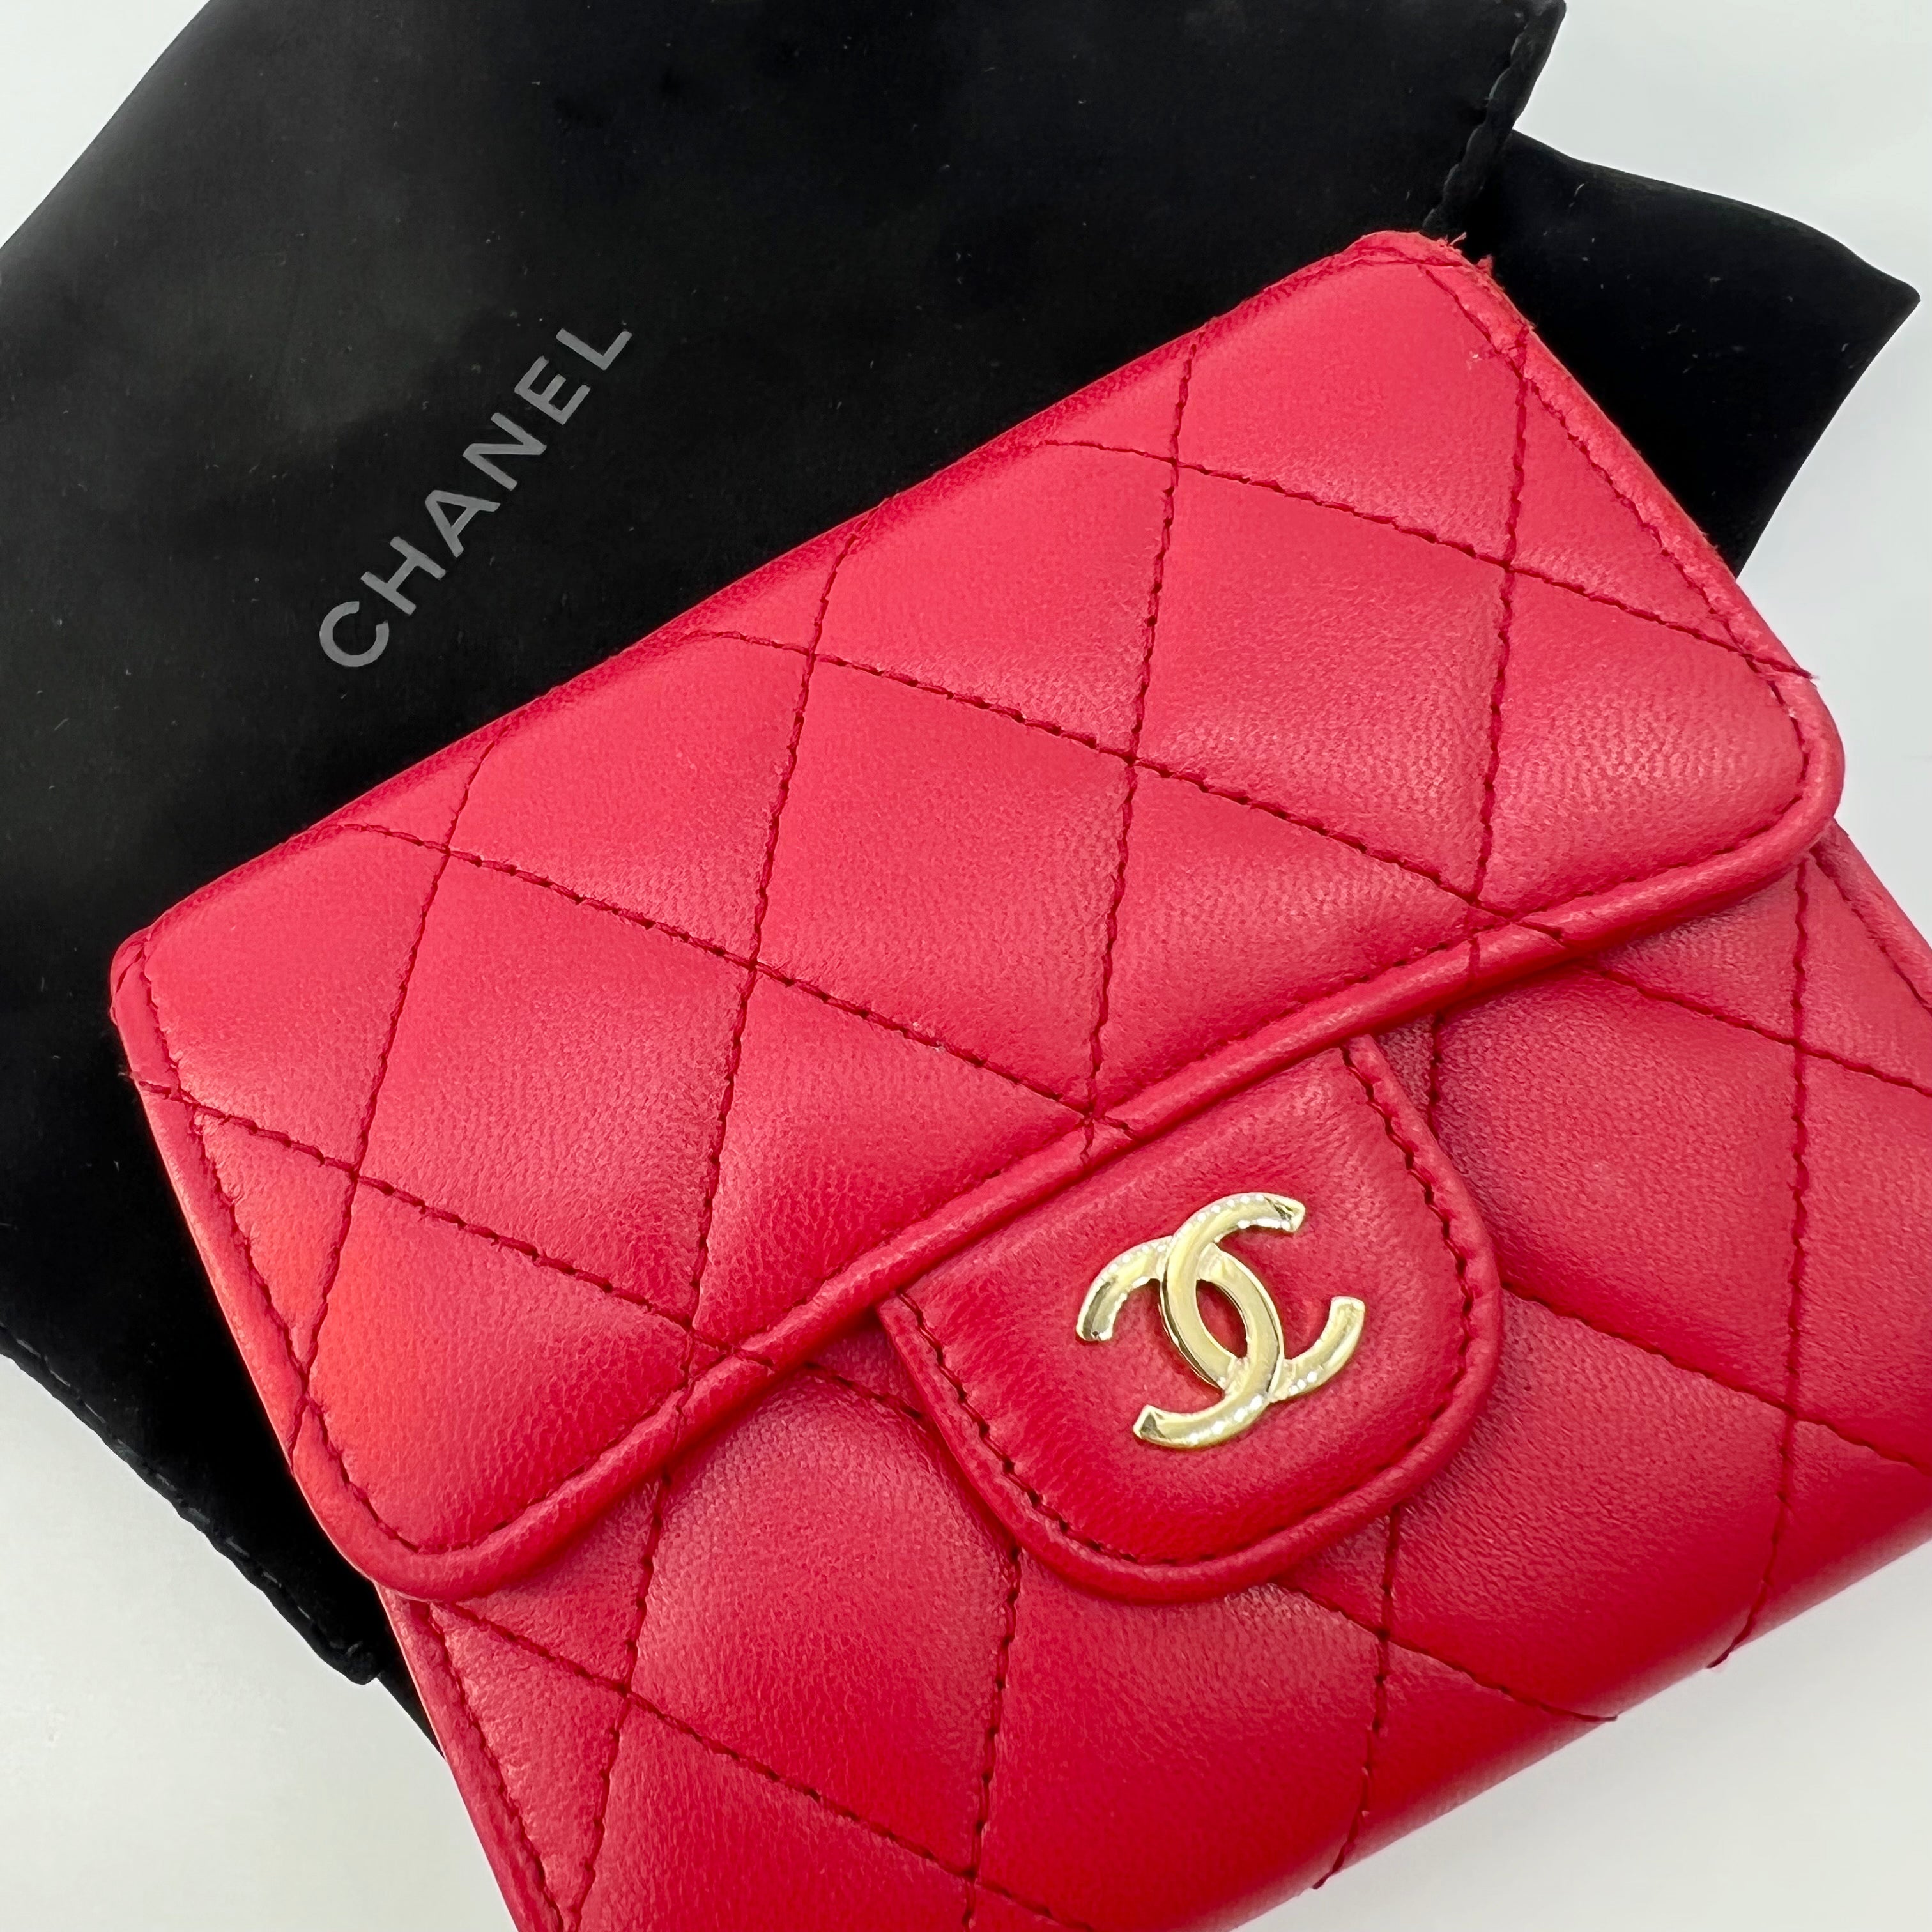 chanel wallet on chain dhgate